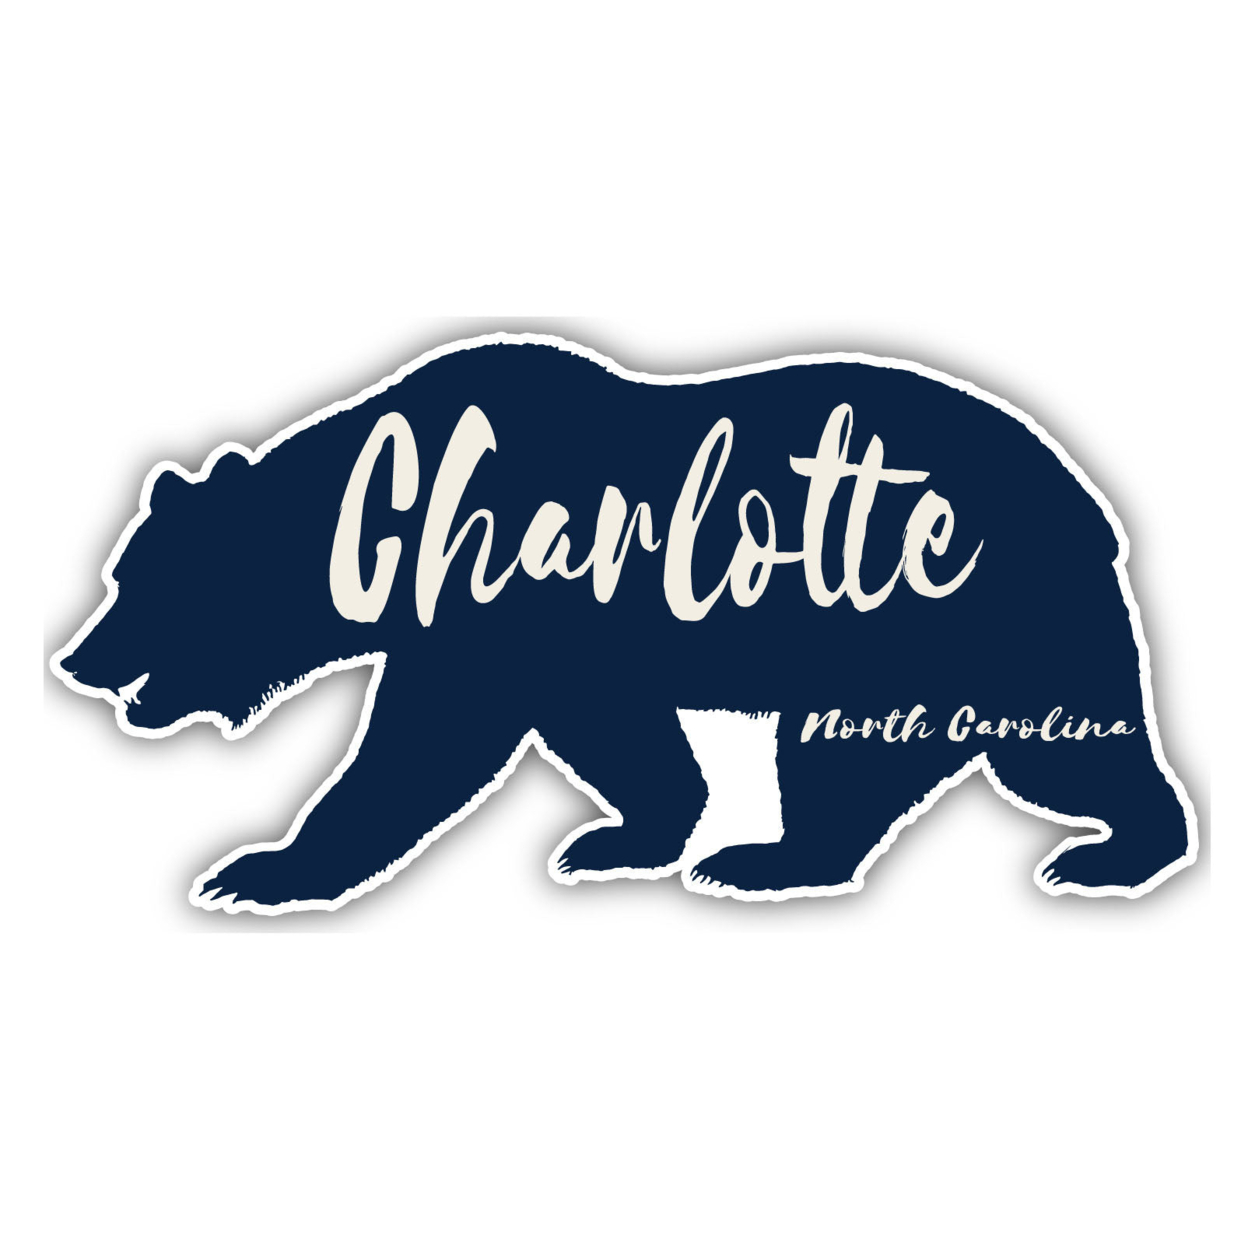 Charlotte North Carolina Souvenir Decorative Stickers (Choose Theme And Size) - Single Unit, 2-Inch, Great Outdoors